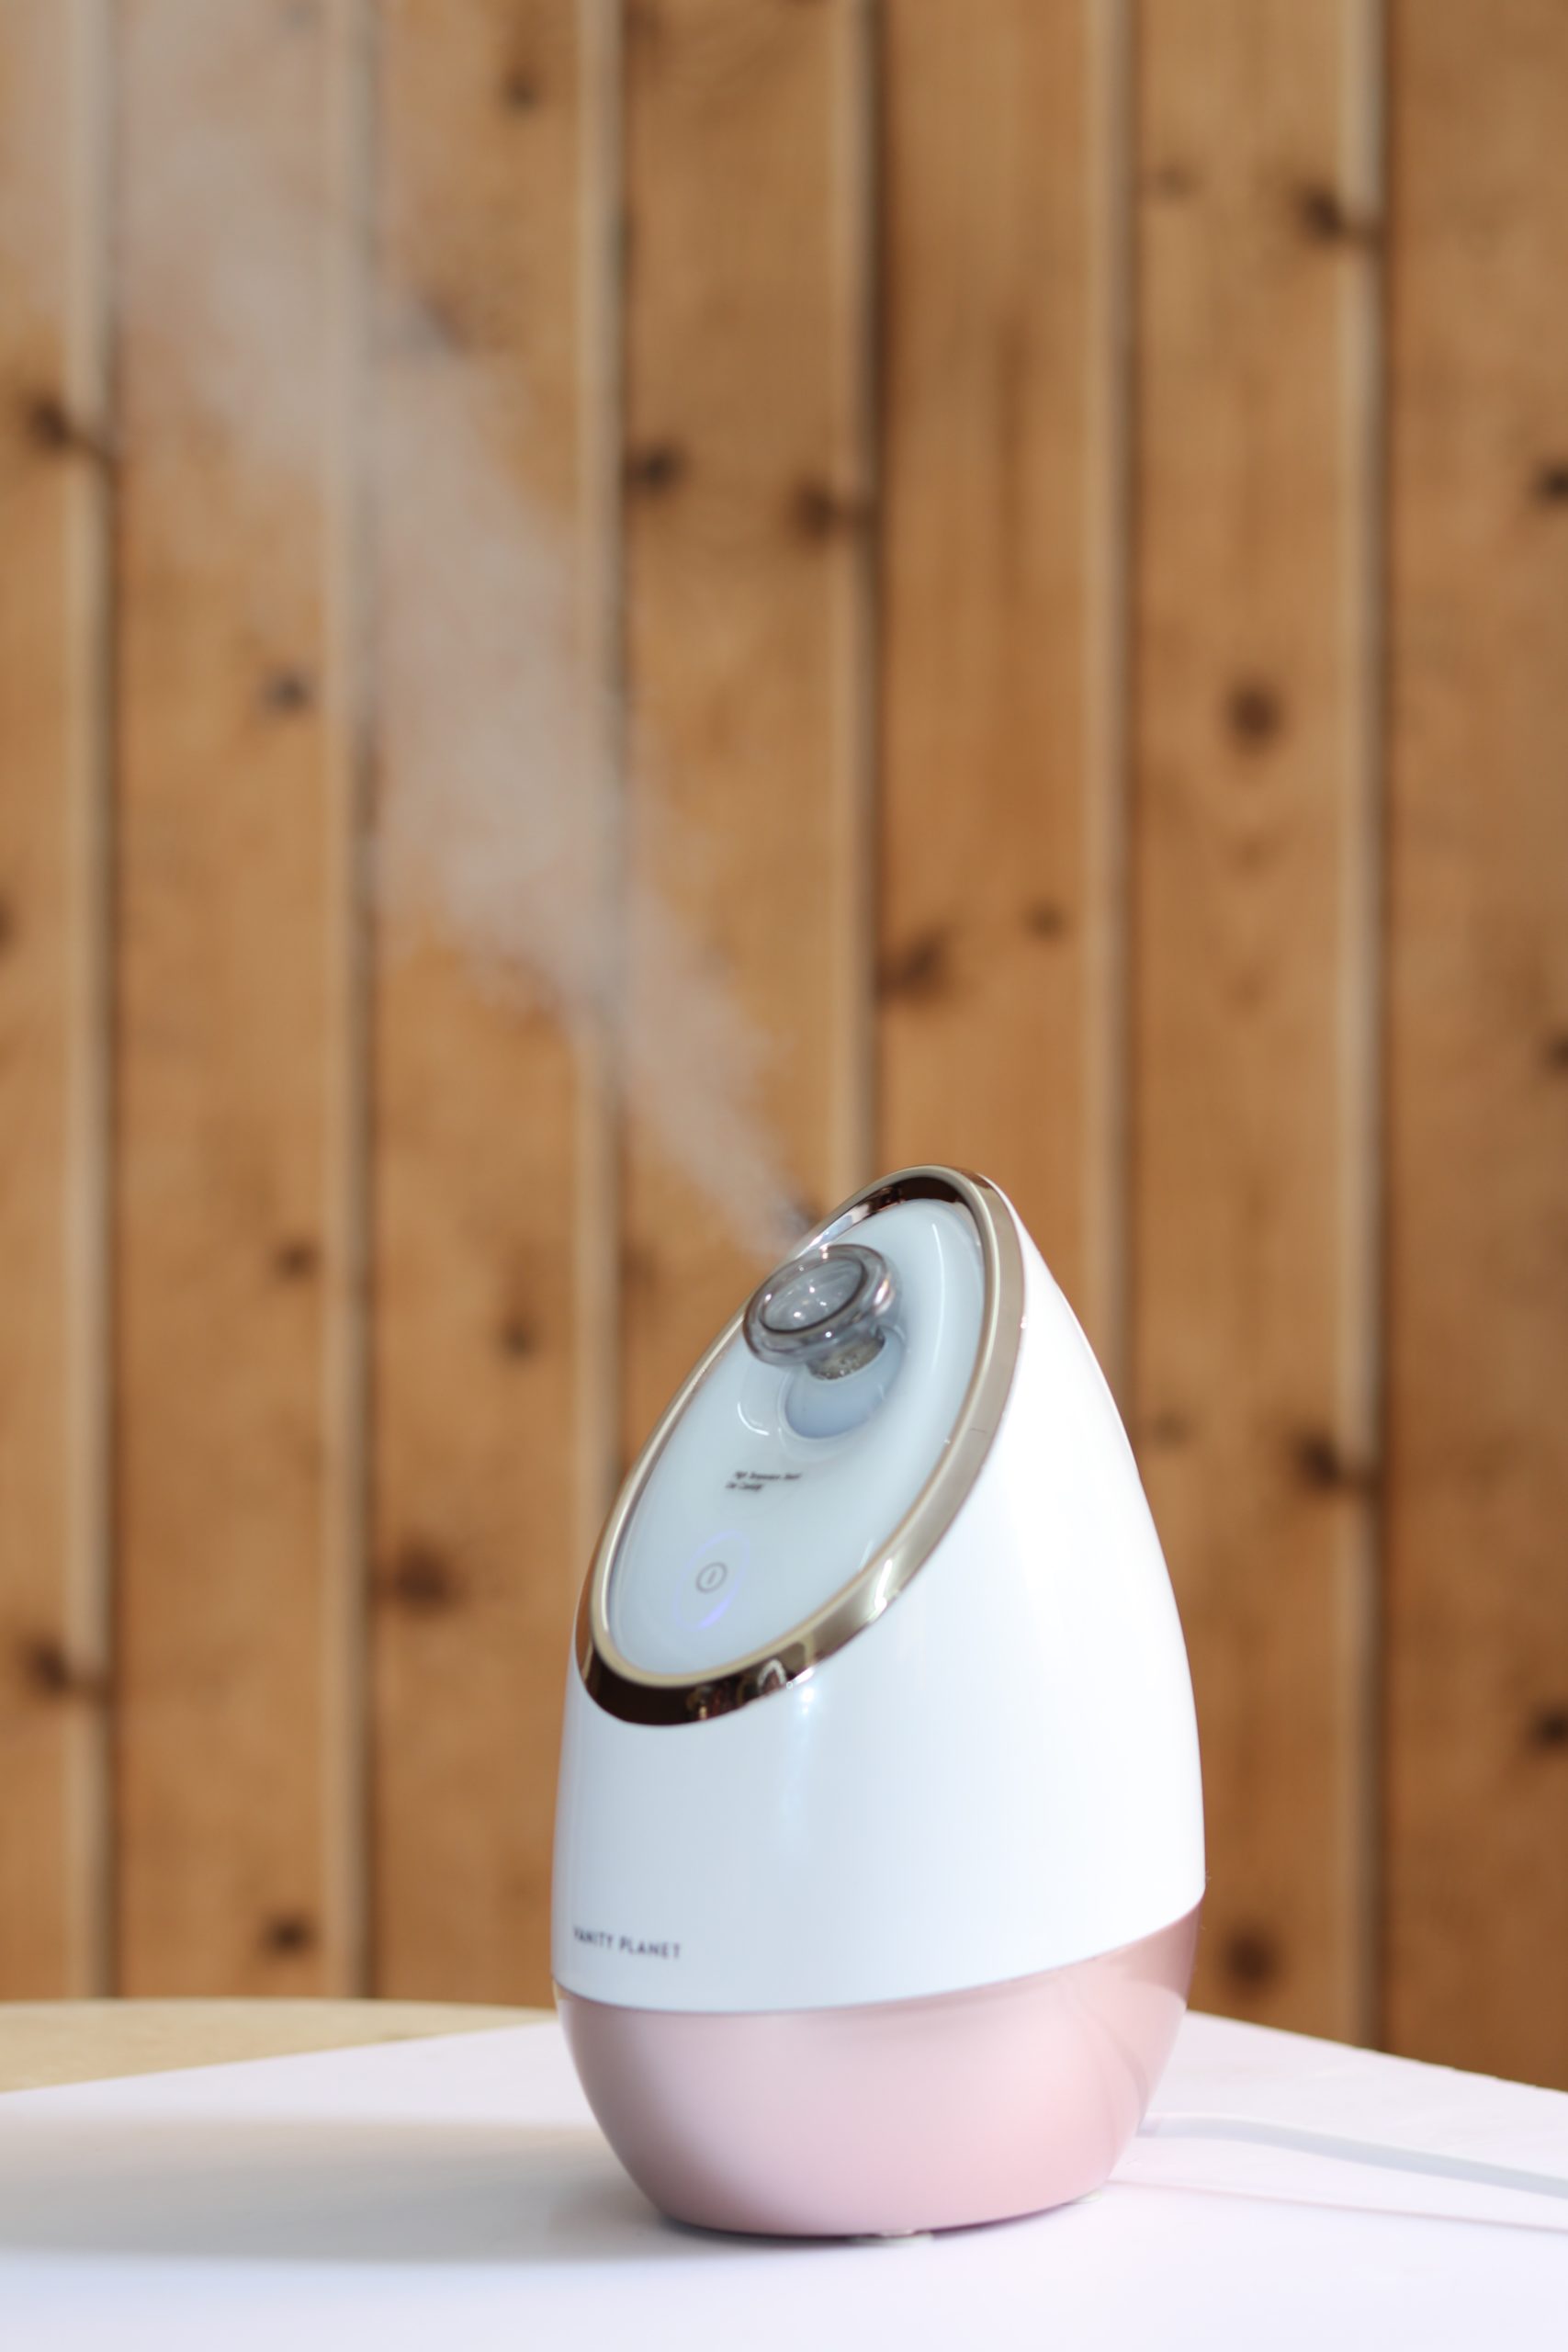 Do You Steam Your Face? Try Vanity Planet’s Aira Facial Steamer